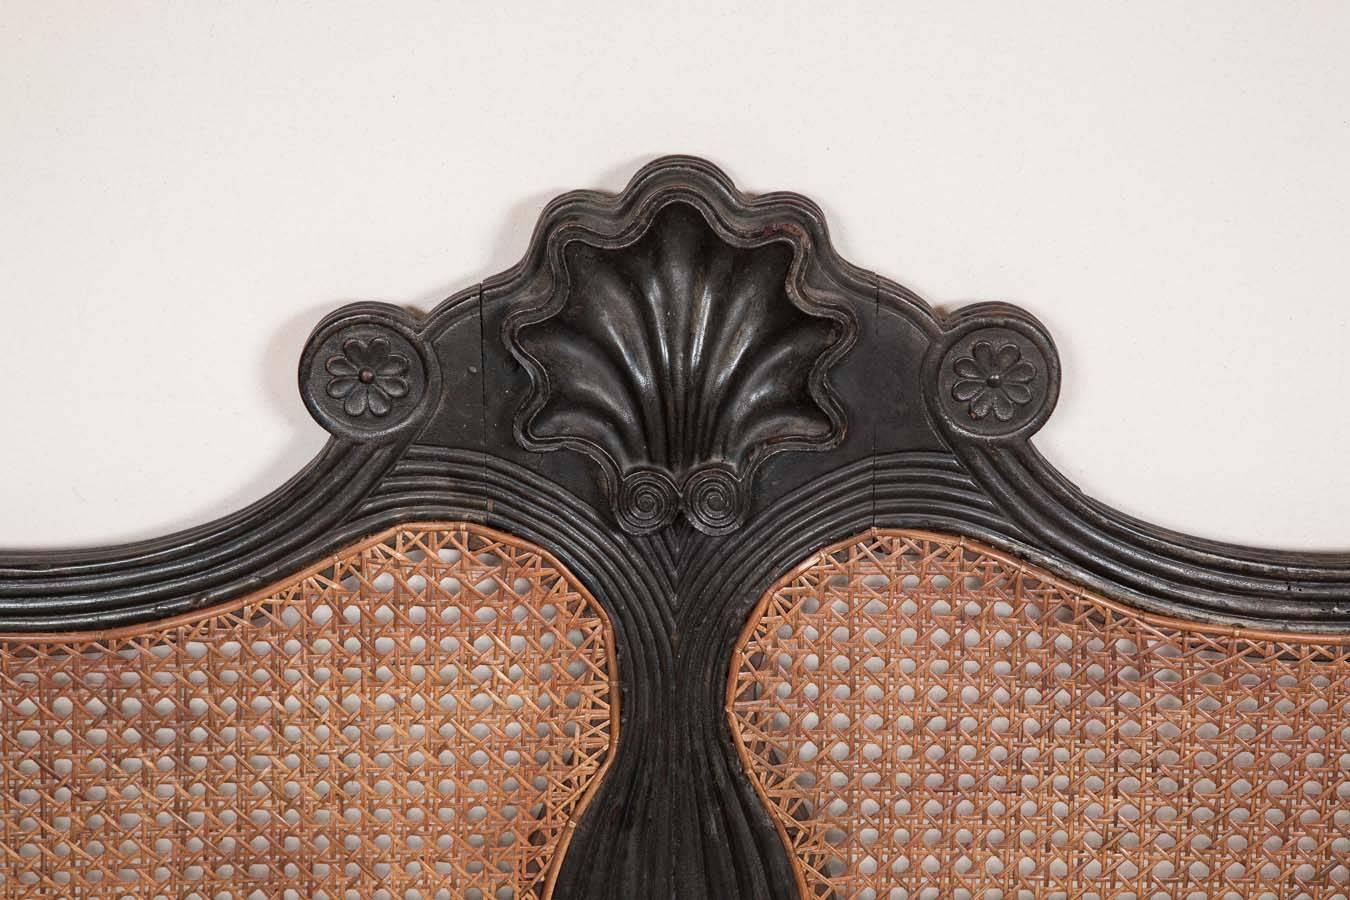 Back to view all New Arrivals
A 19th century ebonised carved Ceylonese settee

A mid 19th century large and heavily carved ebonised settee with shaped top rail with heavily carved central shell motif above a central fluted splat with caning to